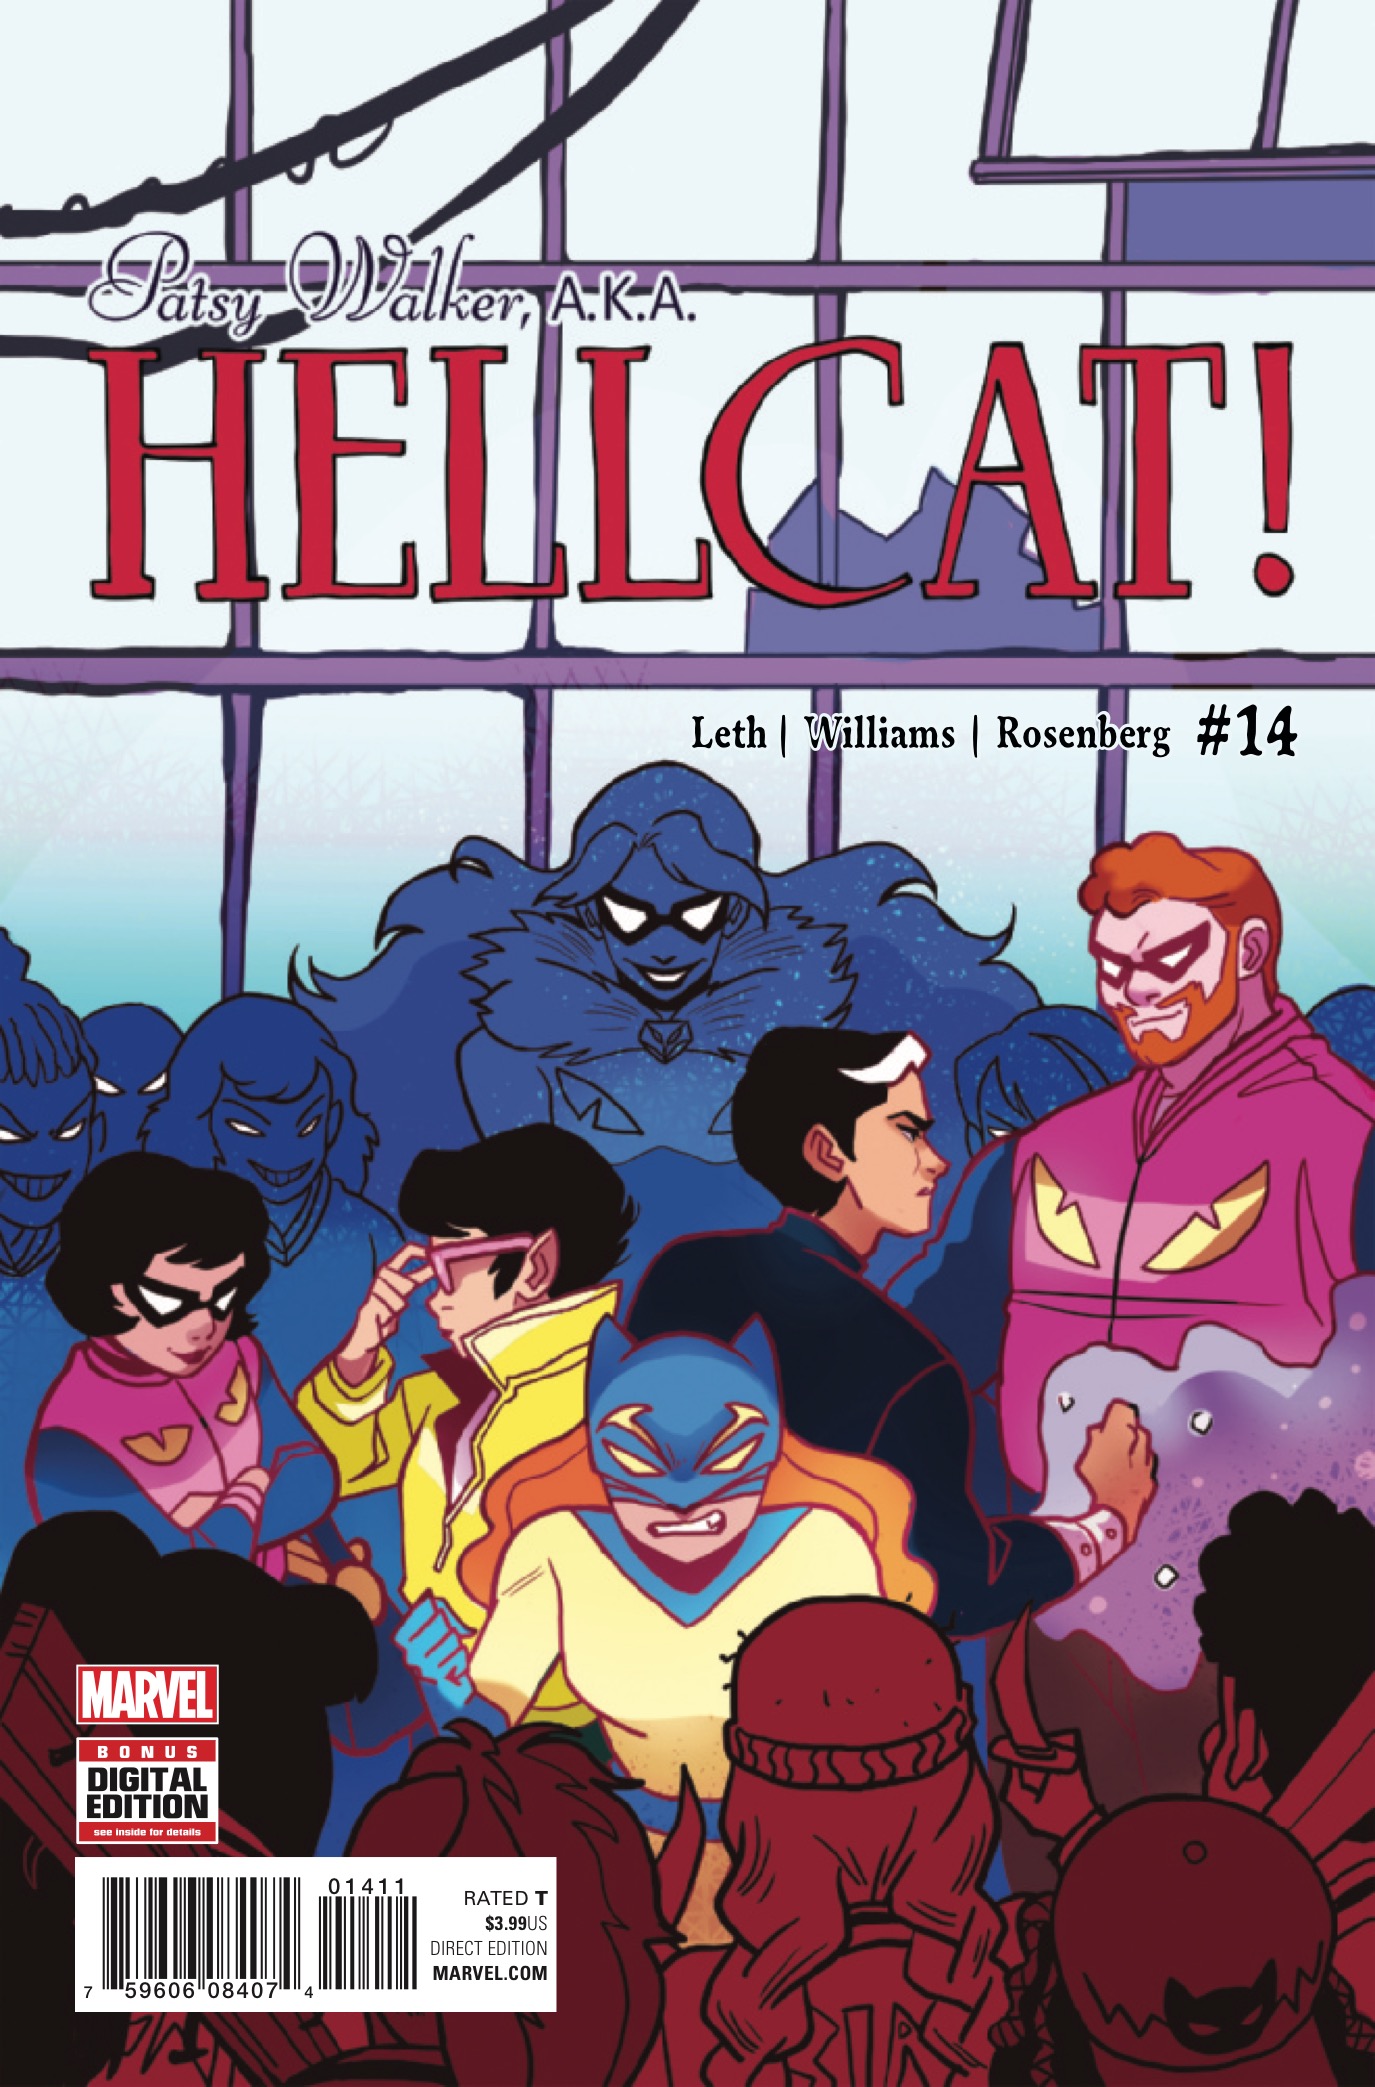 Marvel Preview: Patsy Walker, A.K.A. Hellcat! #14